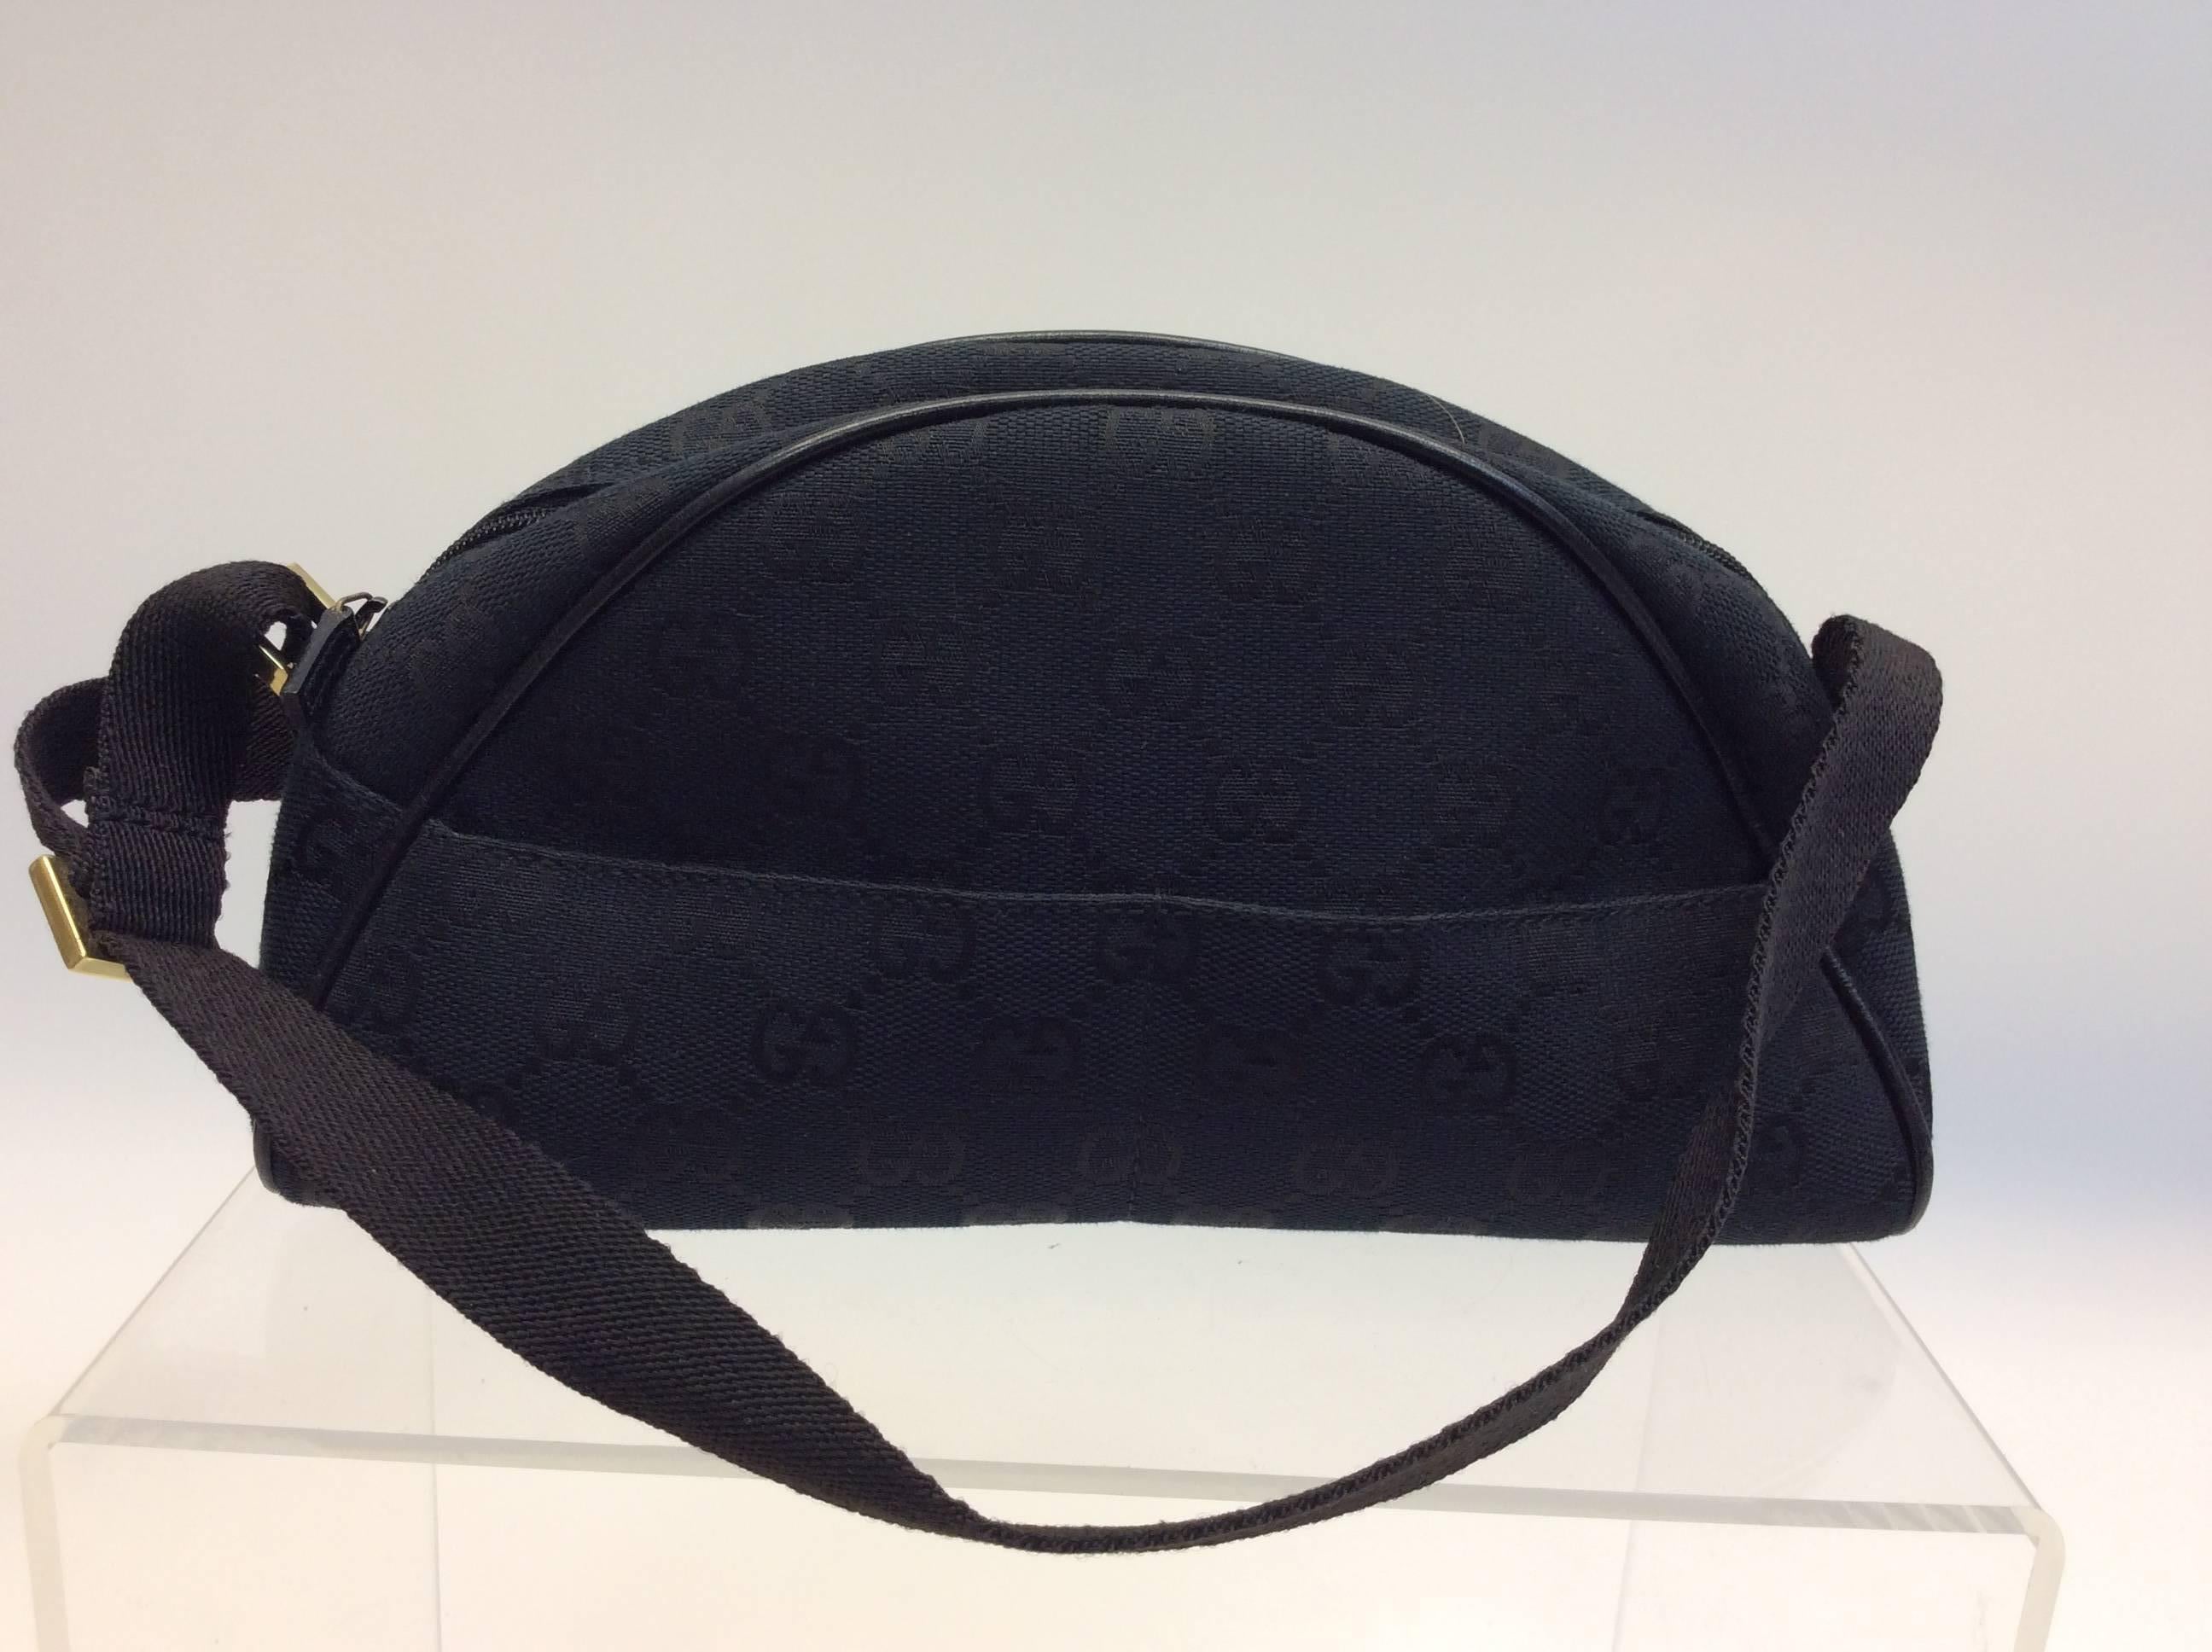 Gucci Black Monogram Small Clutch In Excellent Condition For Sale In Narberth, PA